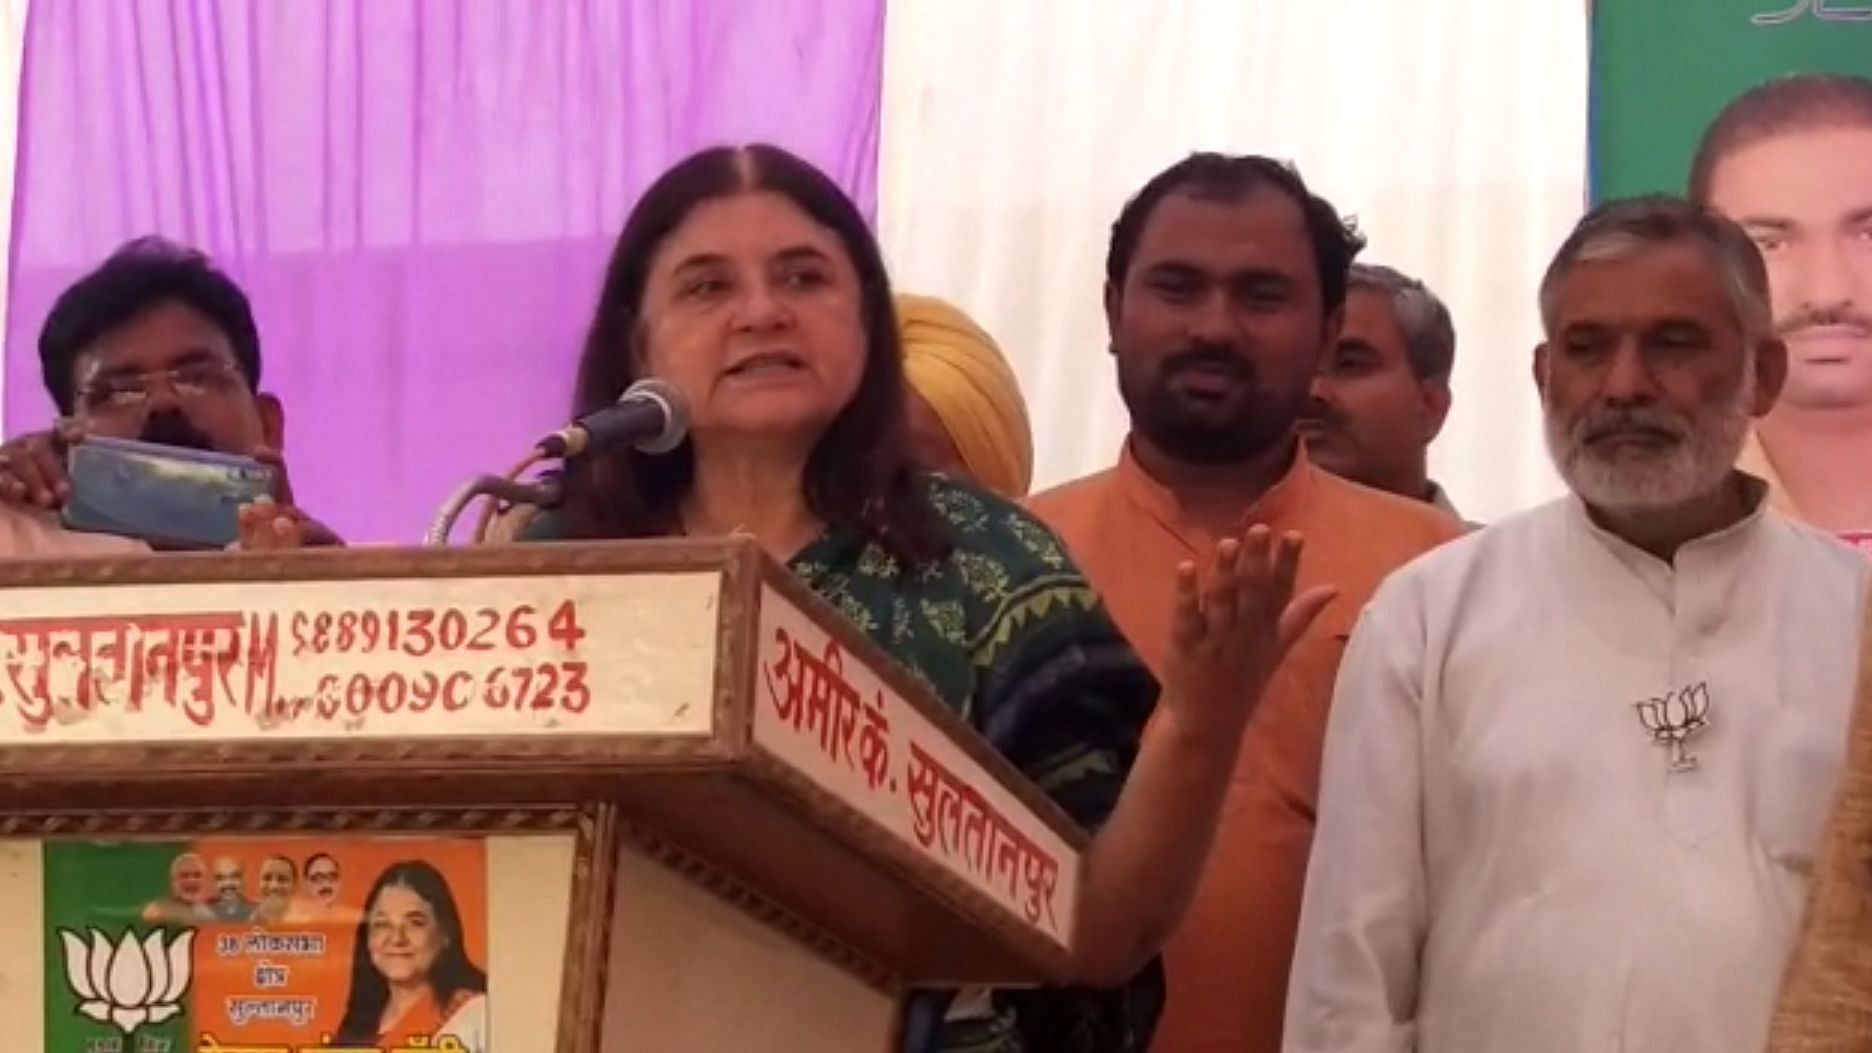 Maneka Gandhi said that she had “already won” the upcoming poll and attempted to coerce people into voting for her.